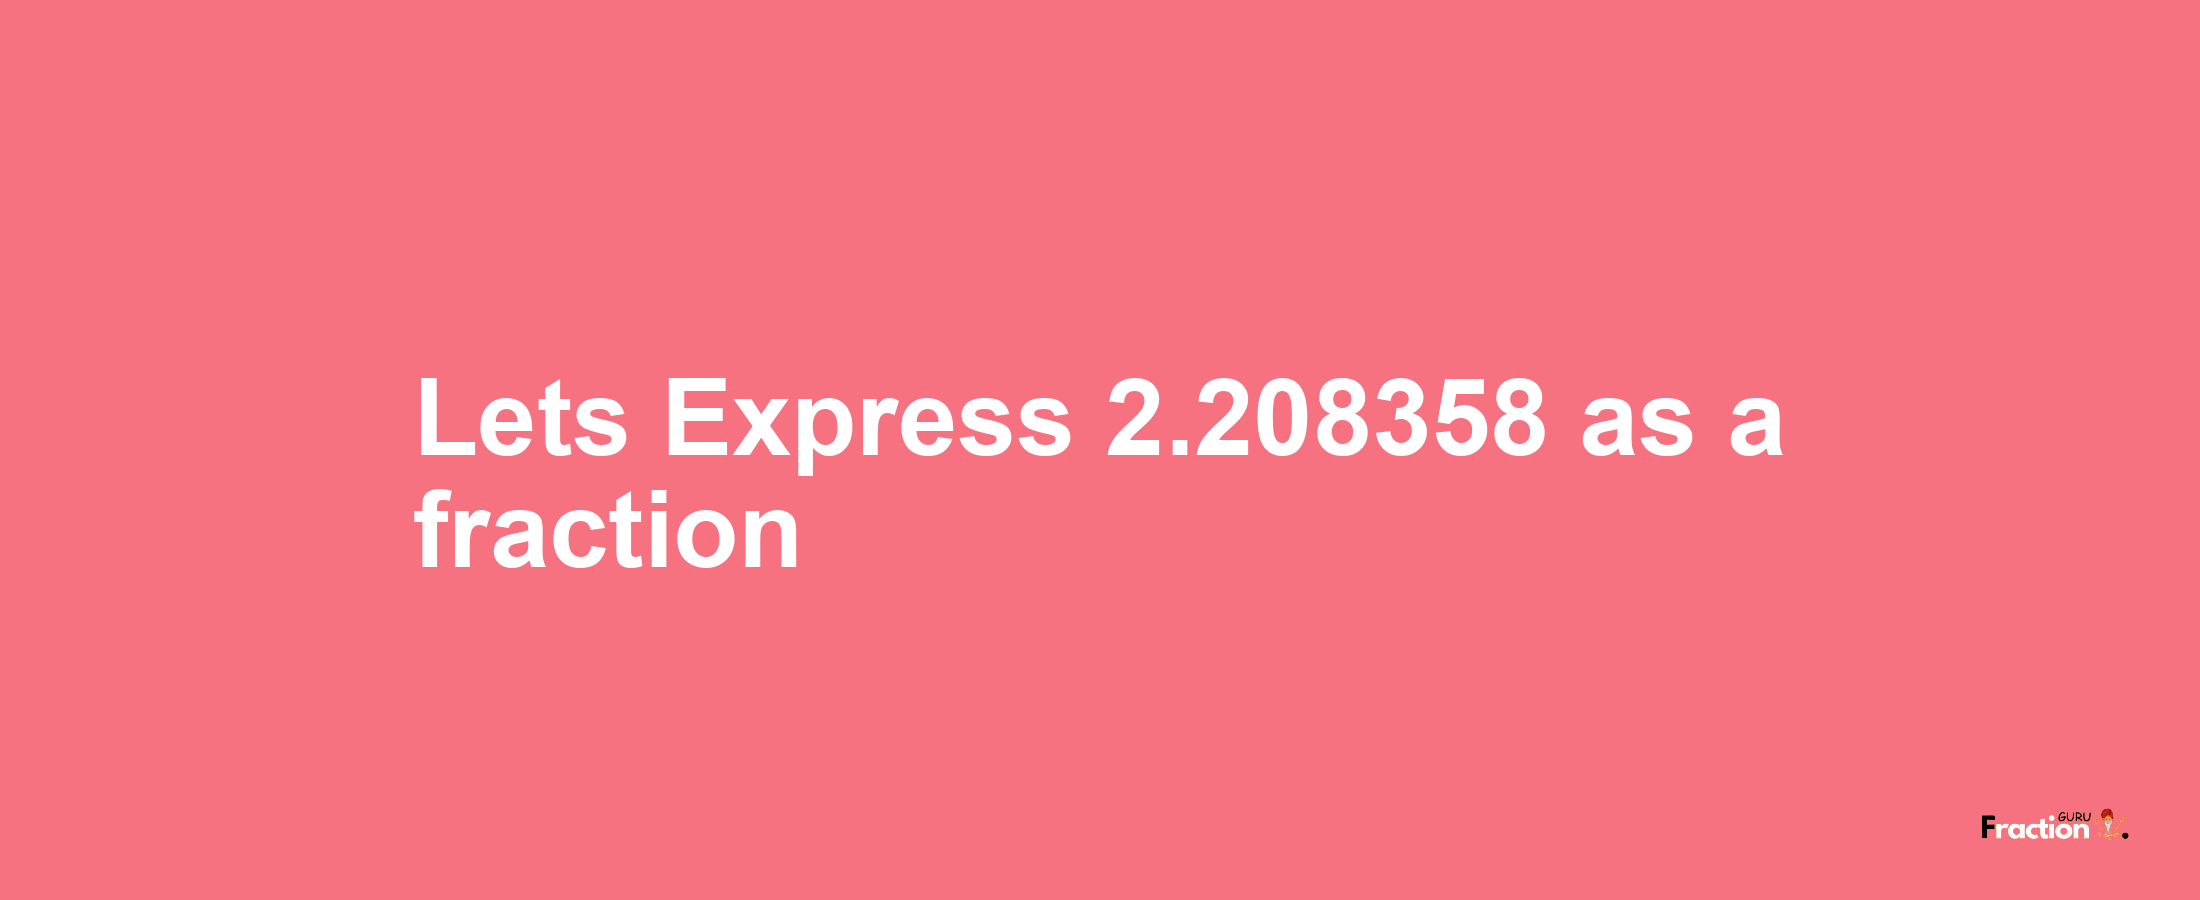 Lets Express 2.208358 as afraction